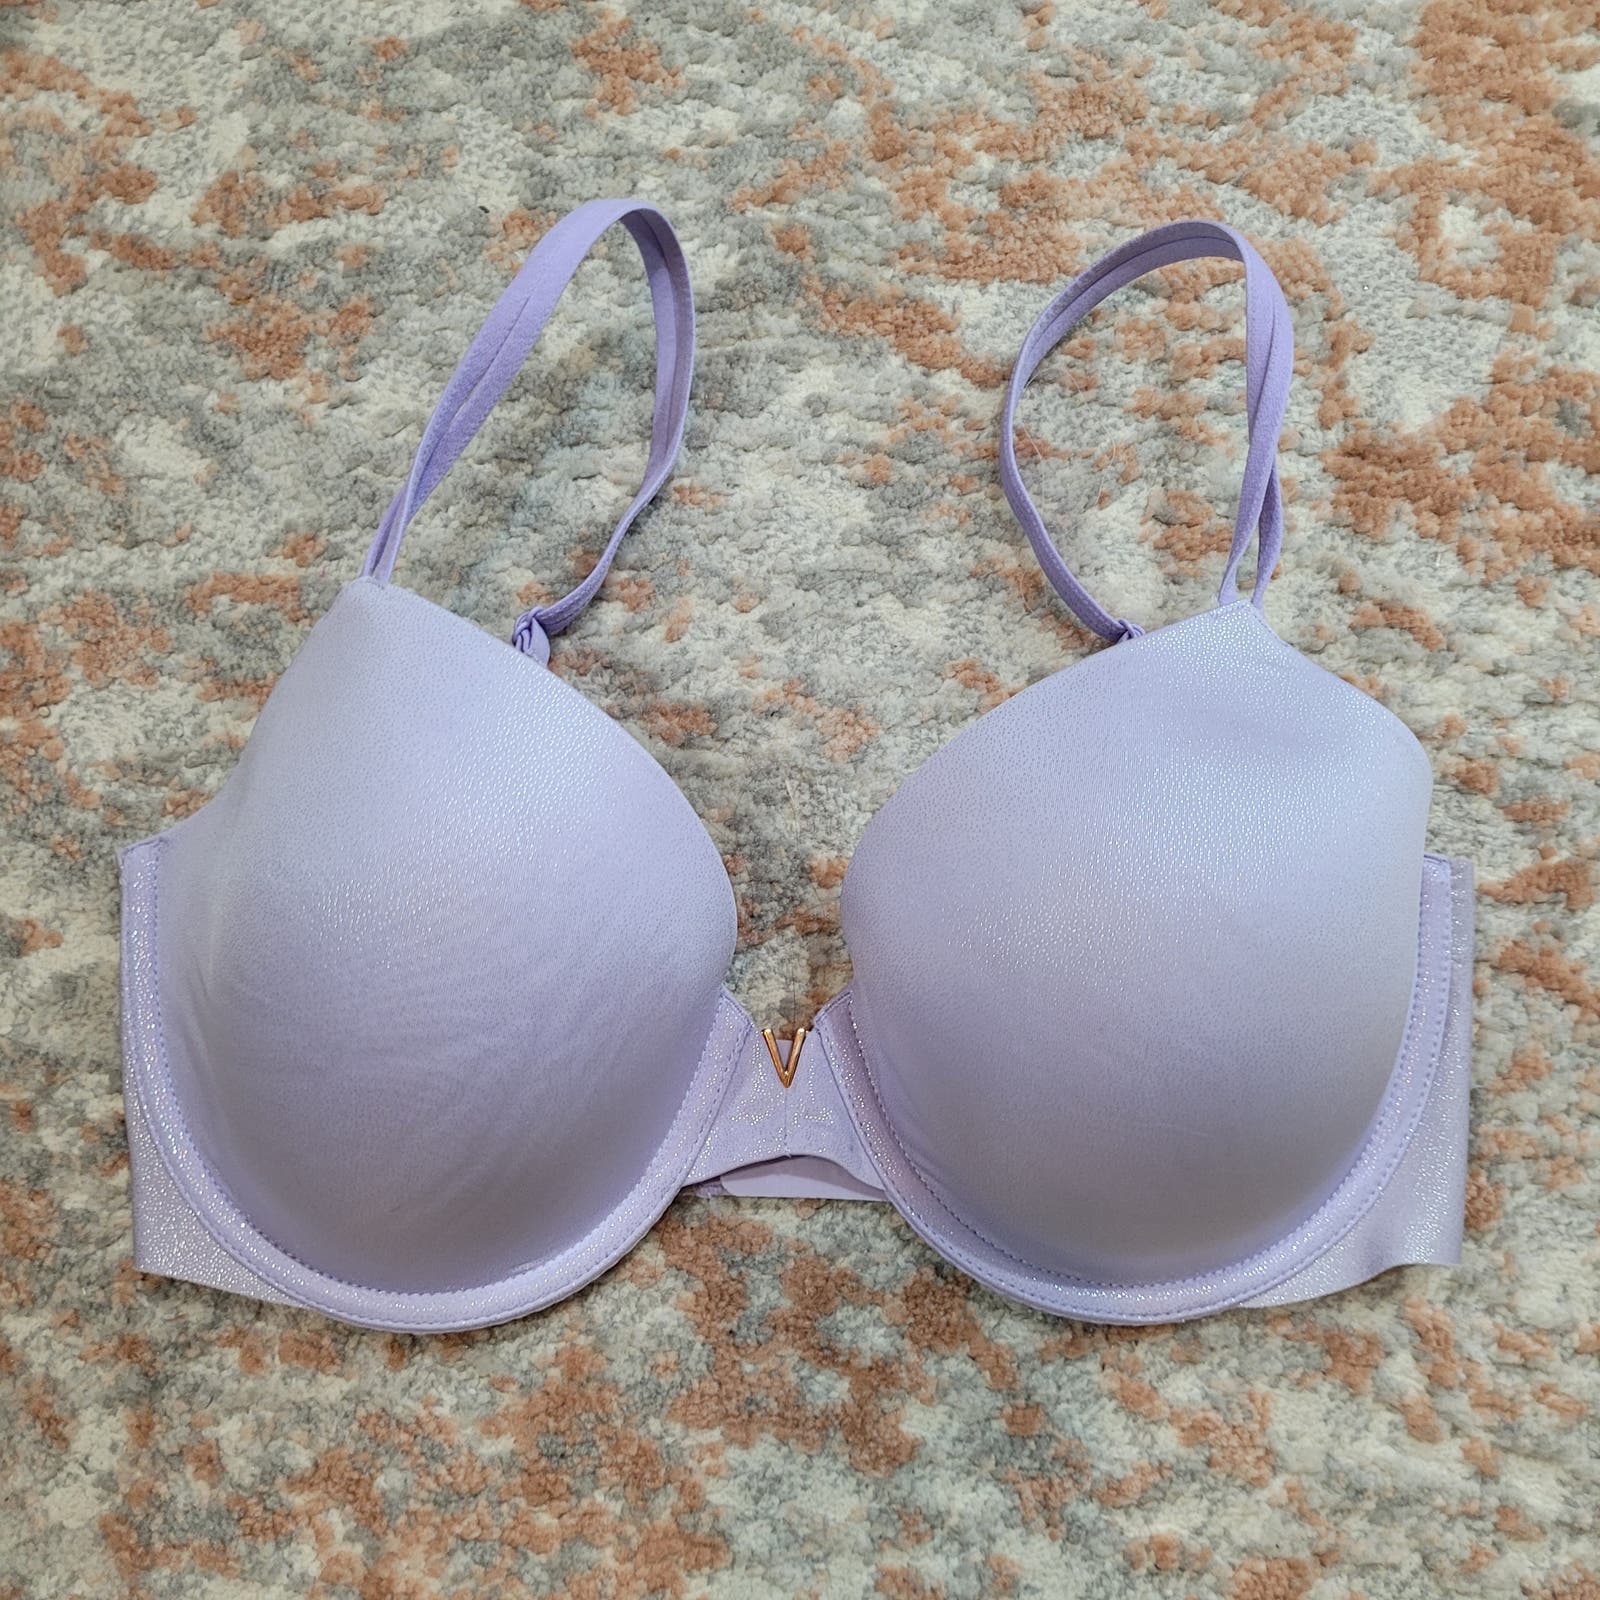 Victoria's Secret Women's 34D Purple Lined Full Coverage Bra Size 34 D -  $25 - From Tanya